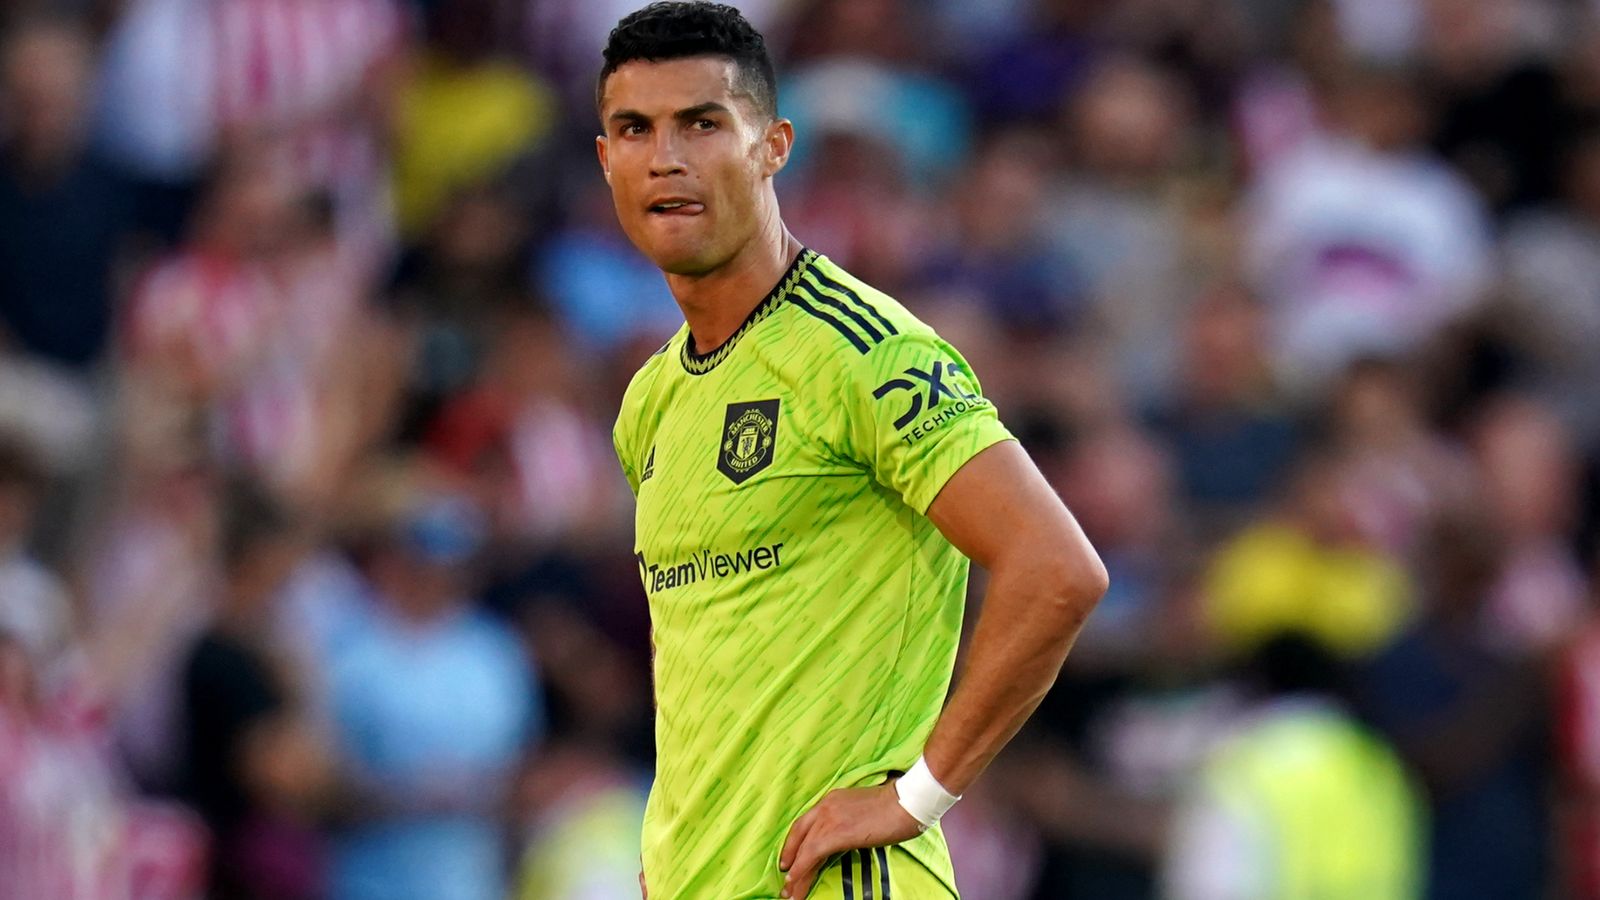 Cristiano Ronaldo: Striker may be allowed to leave Manchester United if Erik ten Hag backs departure